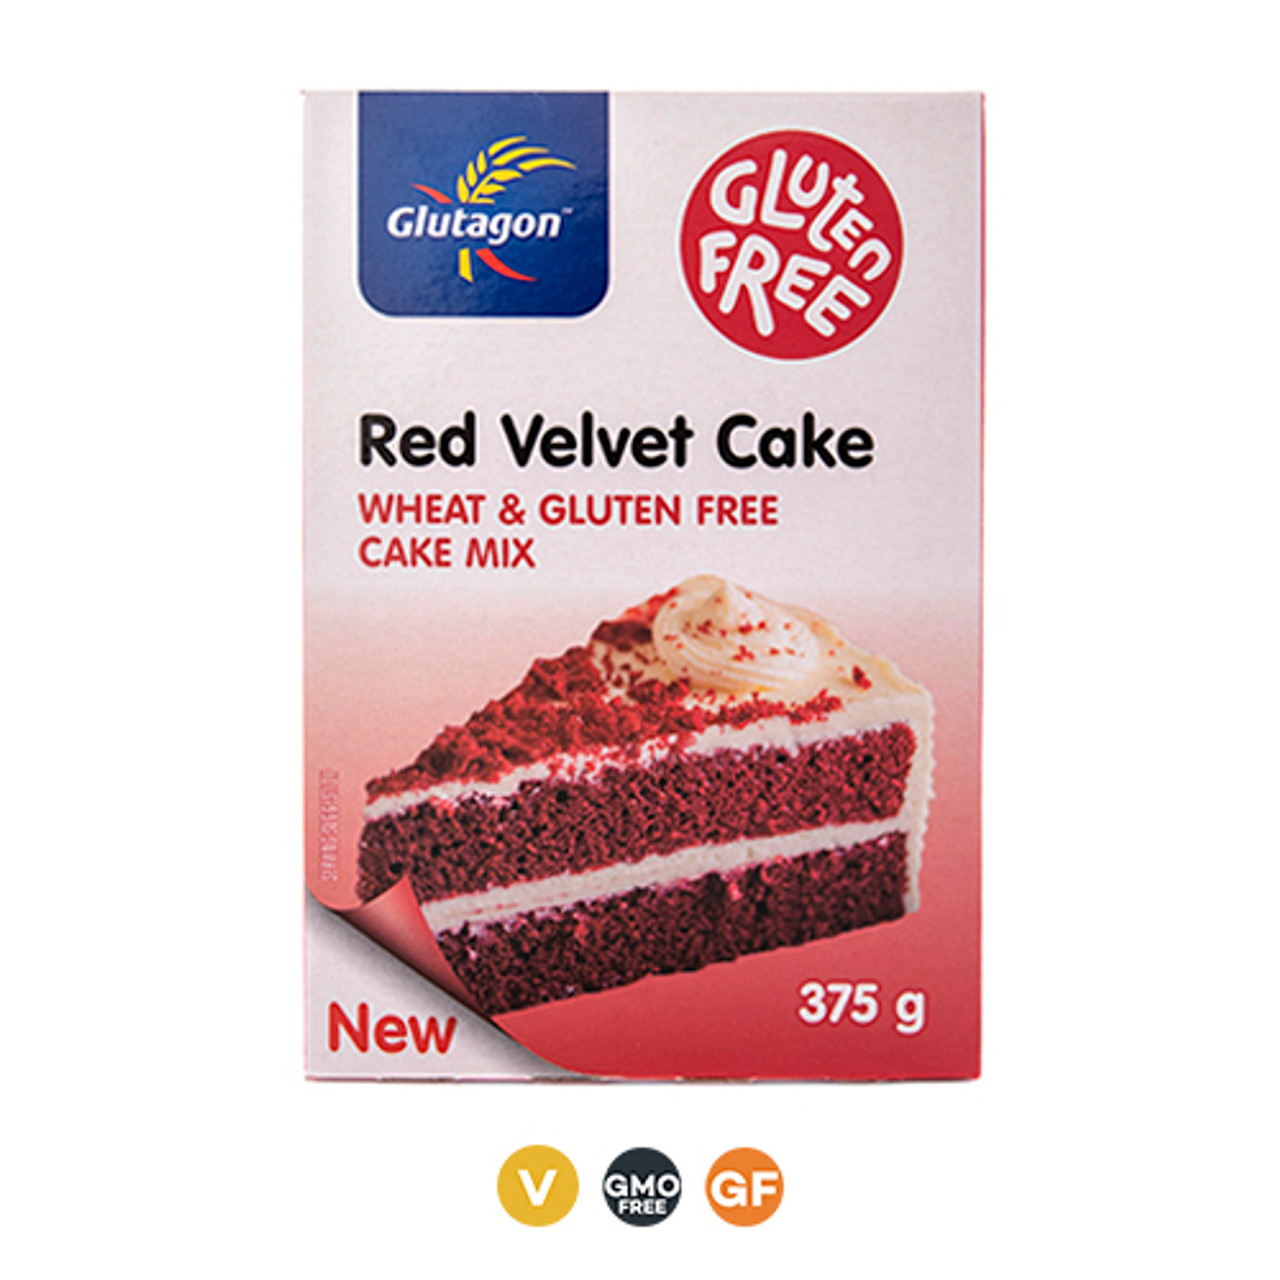 Amrit's Chocolate Cake Premix Powder – 250g (Pack of 2) | Eggless Cake Mix  Powder | Instant Oven/Cooker Cake Mix Powder | 3 Step Cake Premix Powder |  Mix, Pour & Bake :